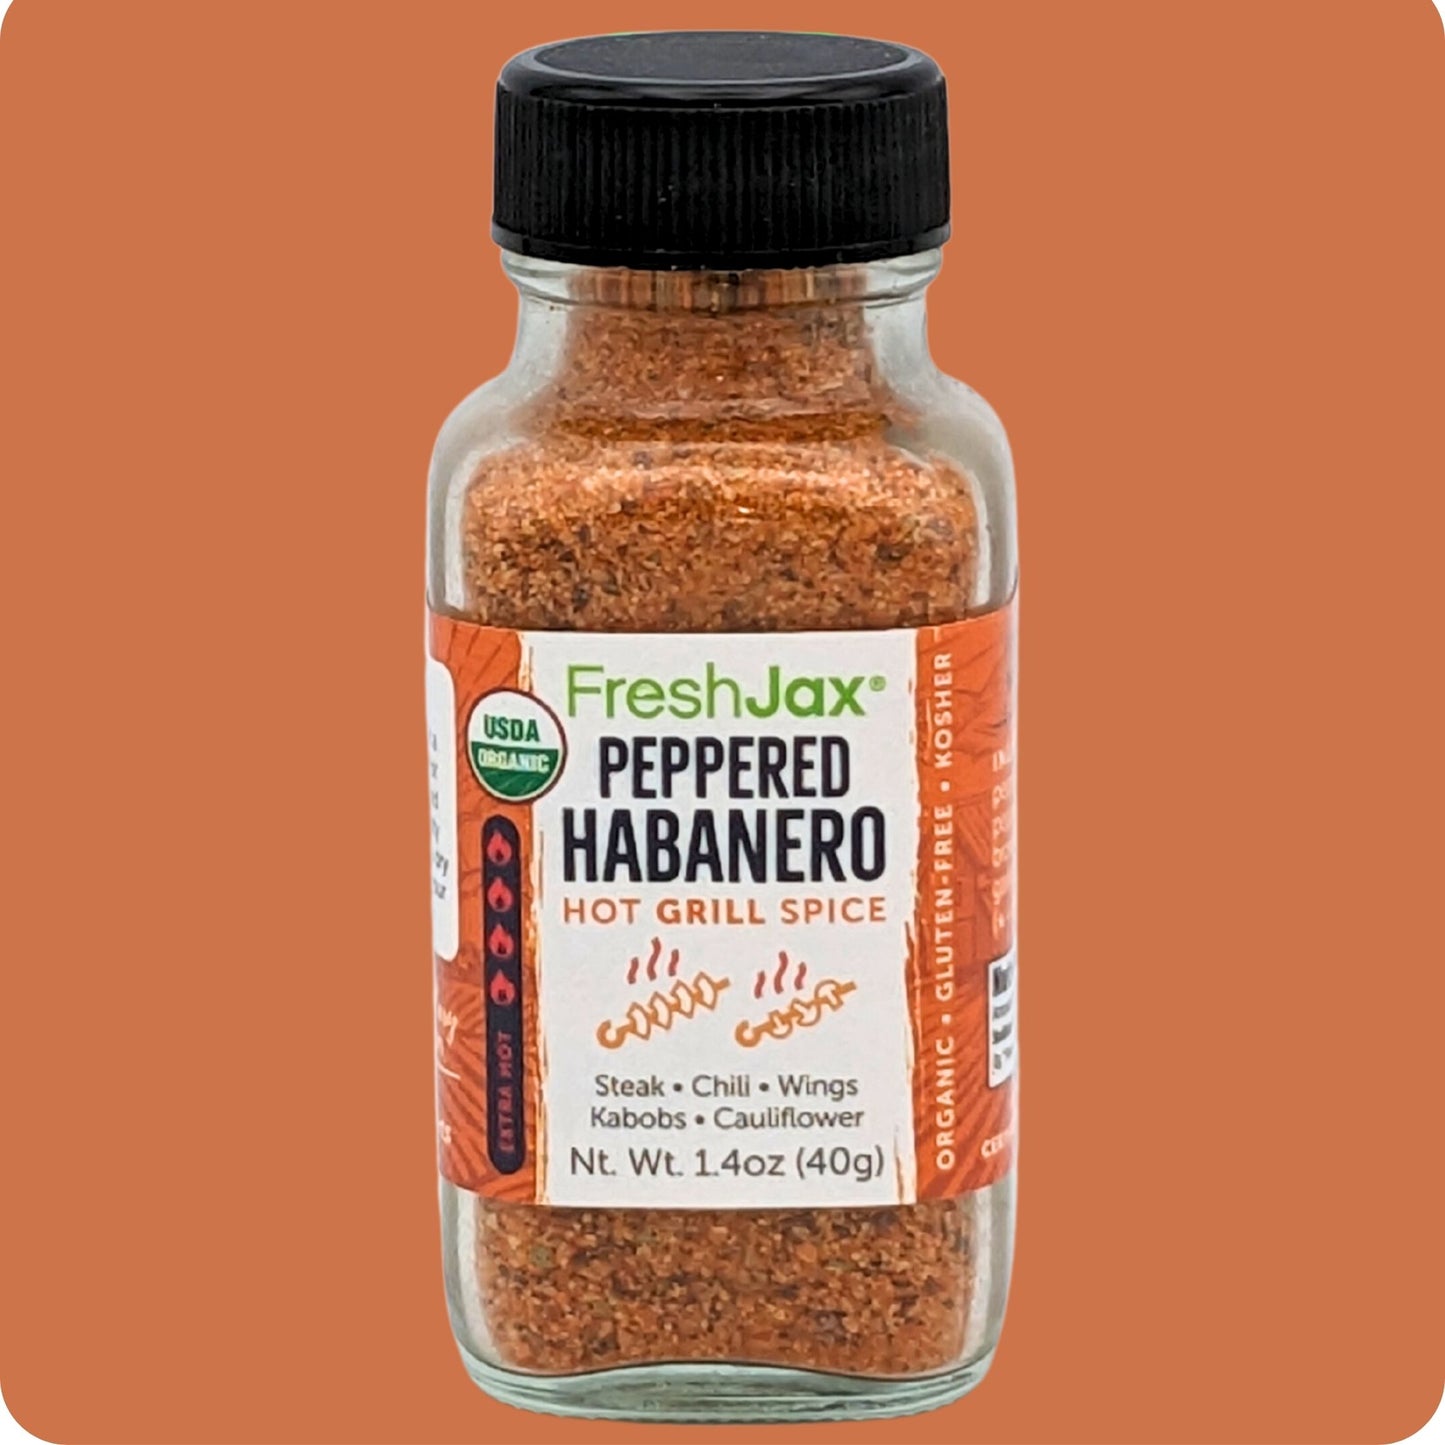 Sampler Sized Peppered Habanero Hot Grill Spice